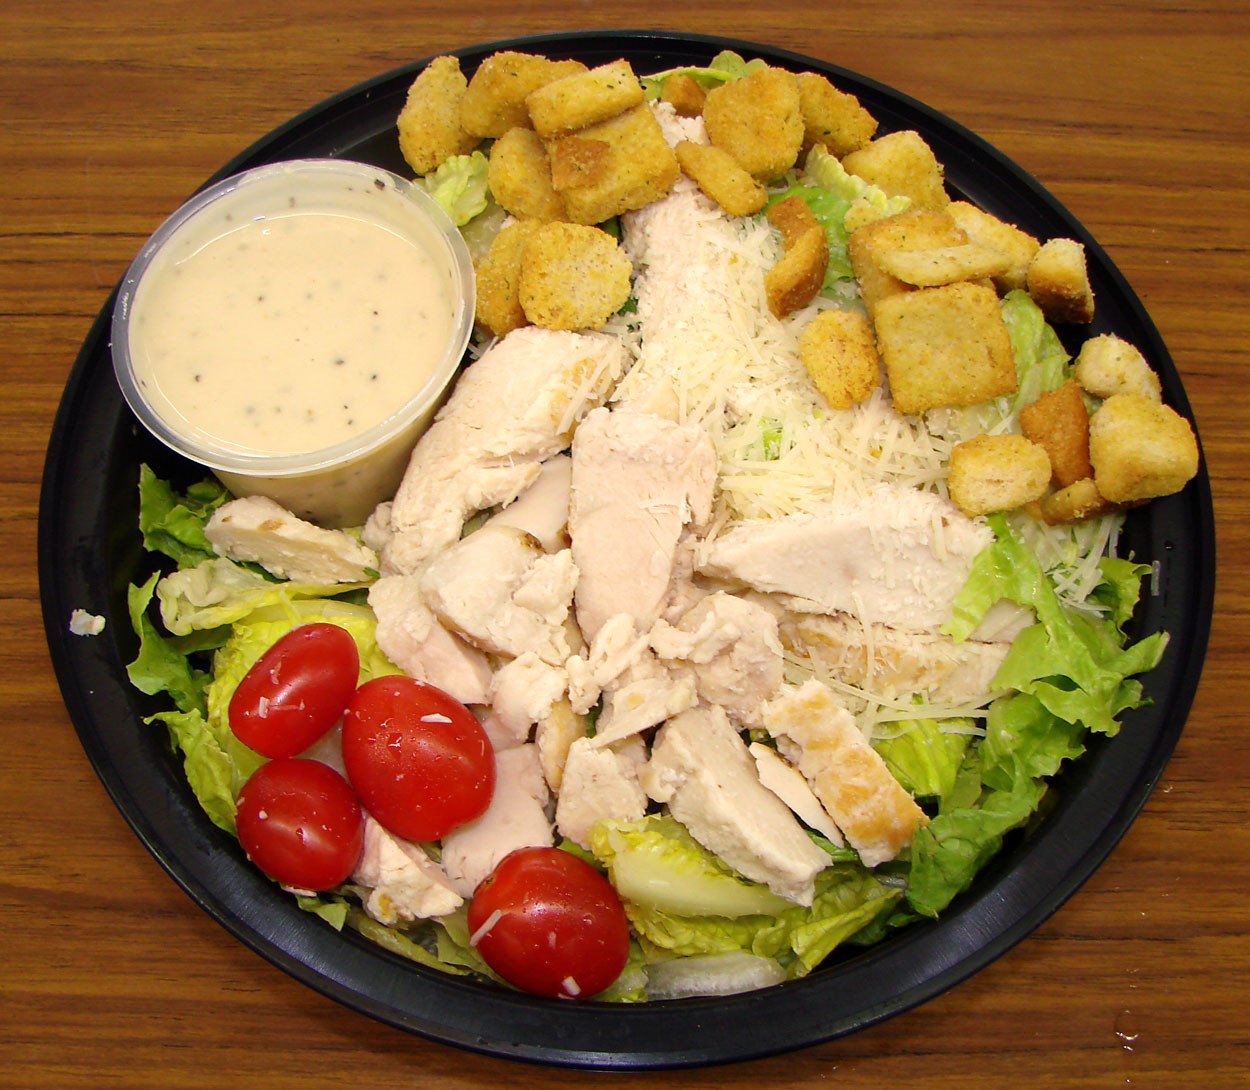 Costco Chicken Salad Nutrition
 Costco Food Court Eat This Not That